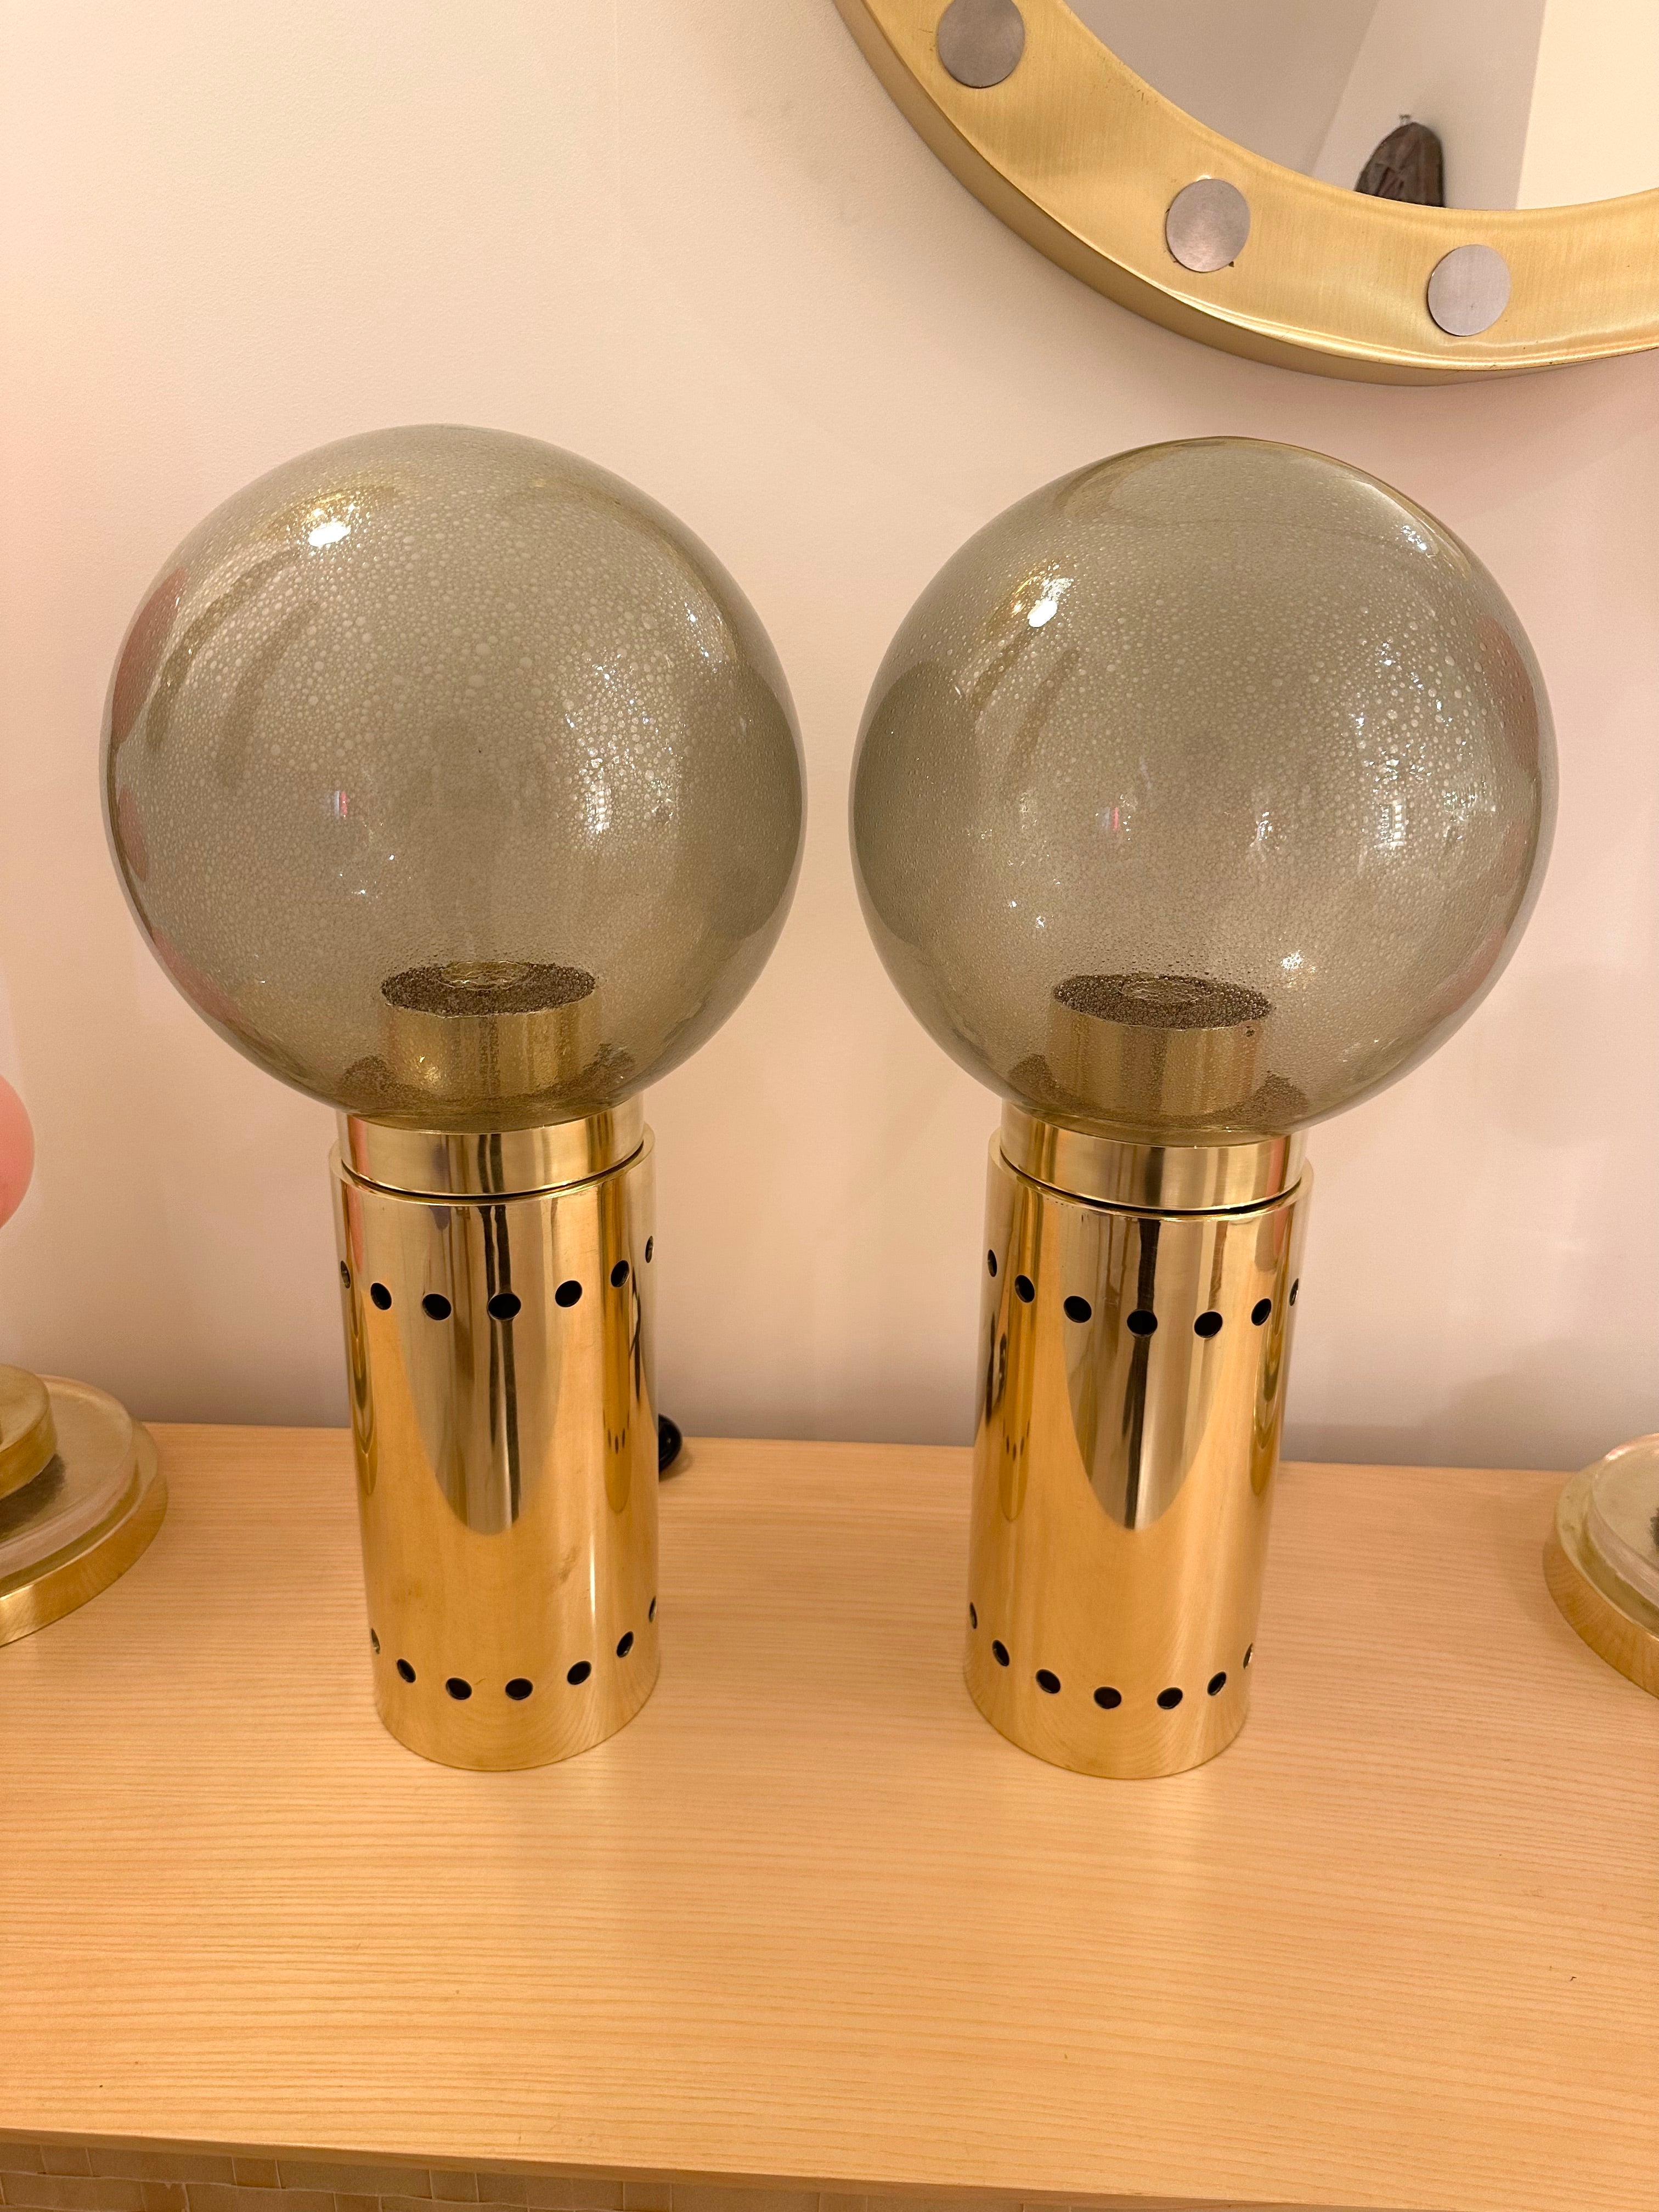 Pair of table or bedside brass lamps and gray Murano glass bubble globe. Illuminated brass base with two intern sockets. Contemporary work from a small italian artisanal workshop in a Mid-Century Modern Space Age Hollywood Regency mood.

